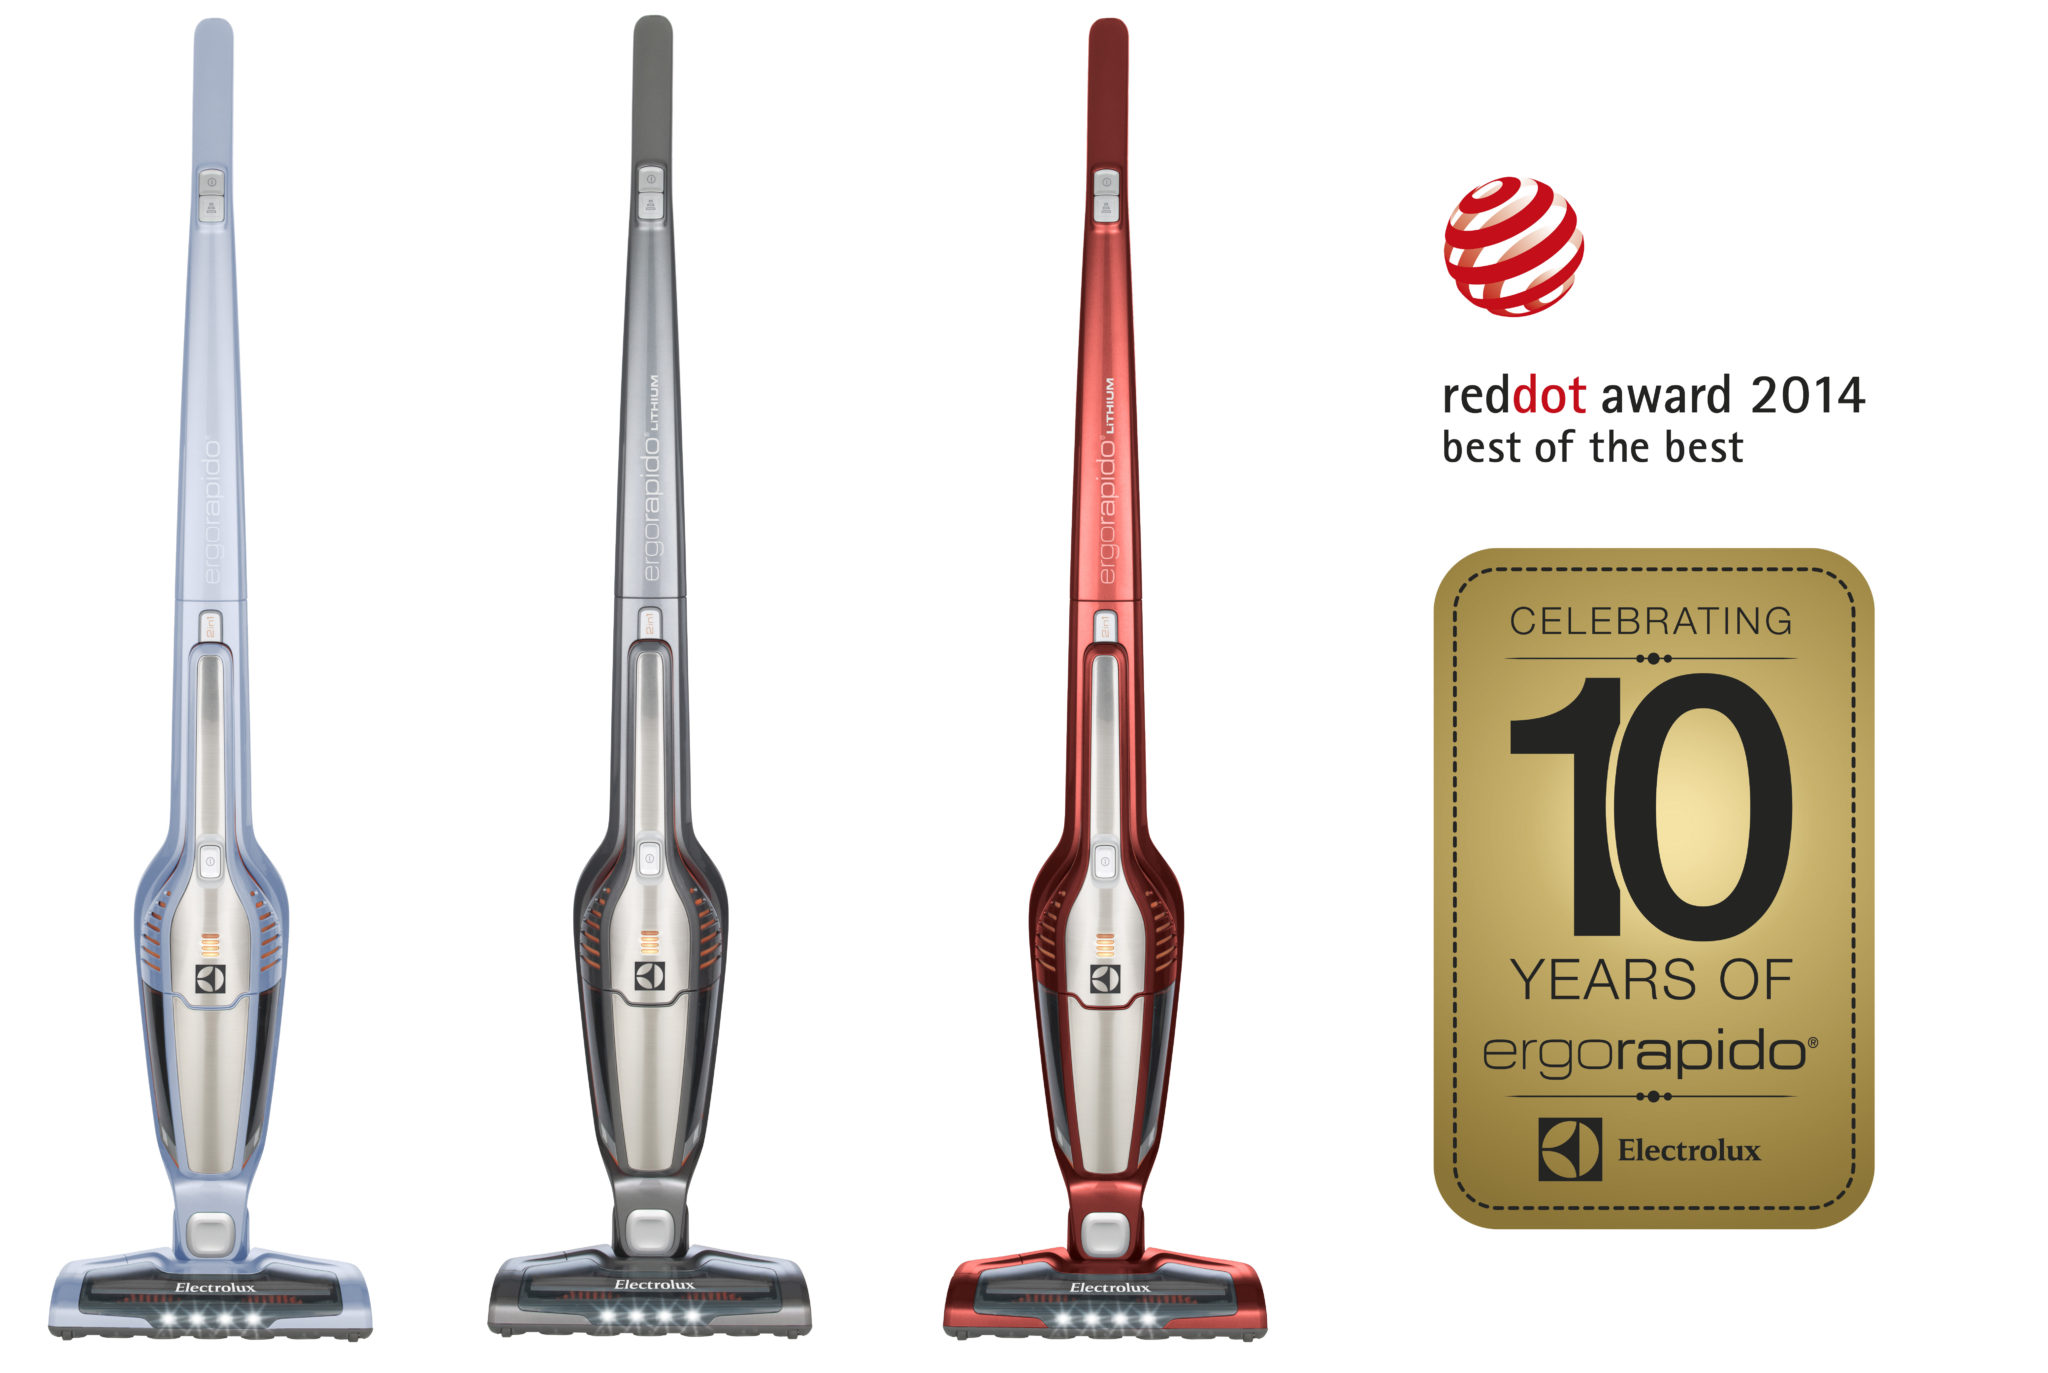 oxiderer koste Genre Electrolux takes home four Red Dot Awards, including the Best of the Best -  The Interiors Addict